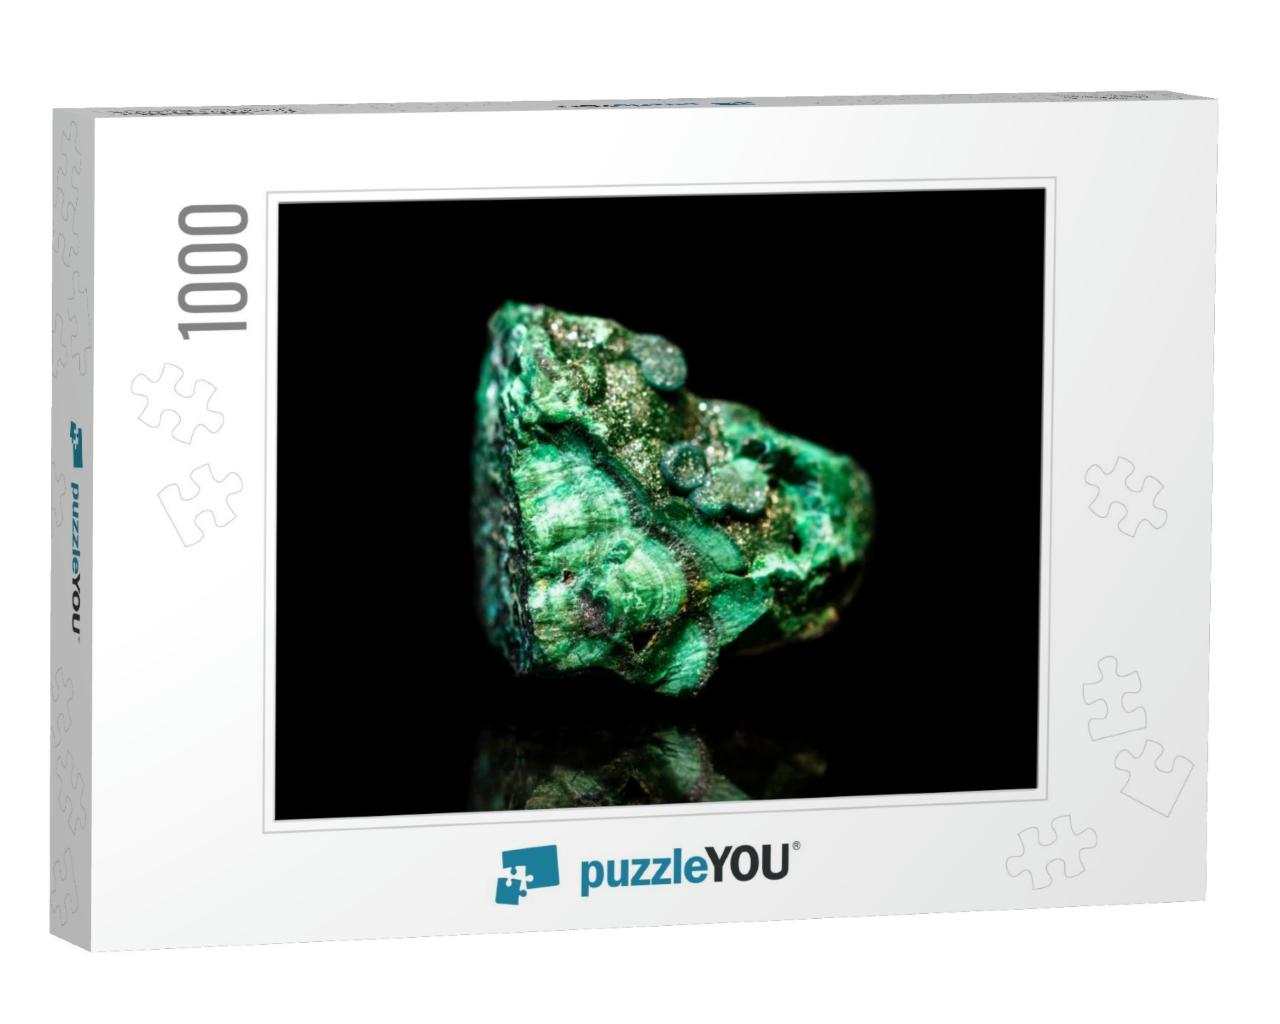 Green Rough Malachite Mineral Stone in Front of Black Bac... Jigsaw Puzzle with 1000 pieces